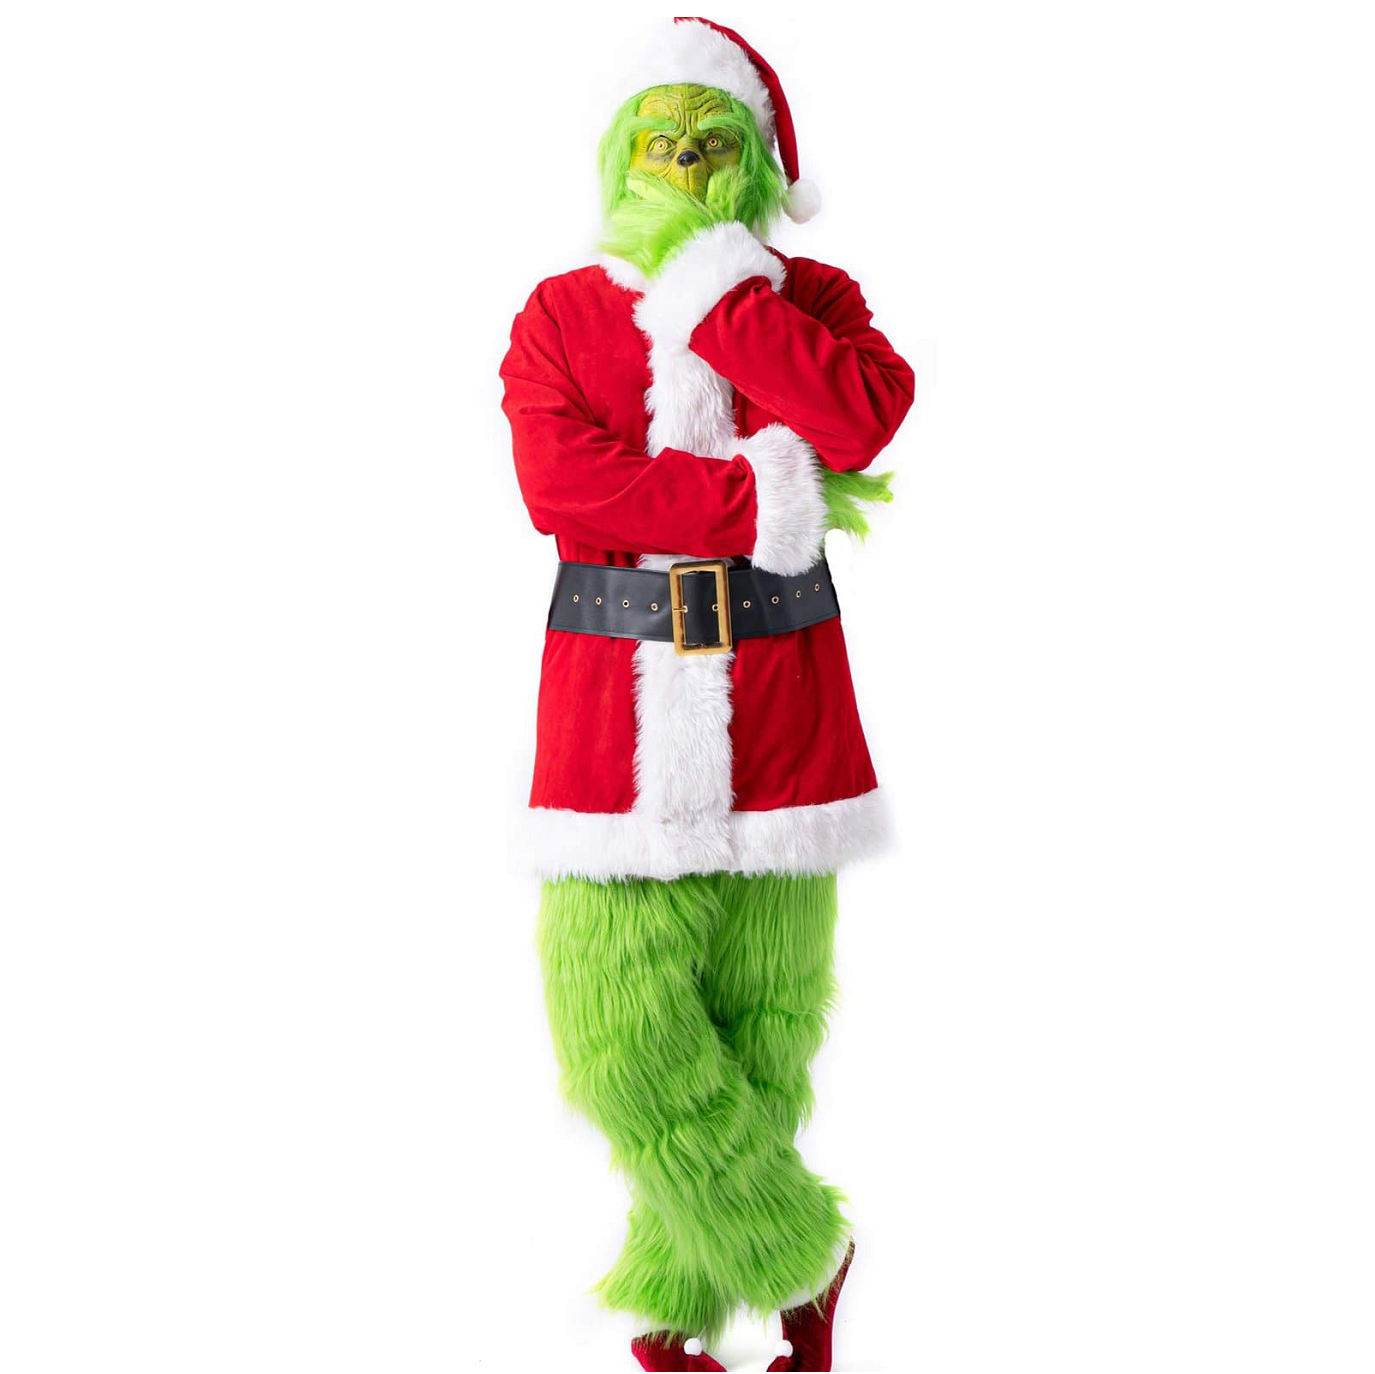 Christmas Green Big Monster Santa Costume 6 PCS Deluxe Furry Adult Santa Suit Xmas Holiday Outfit Set